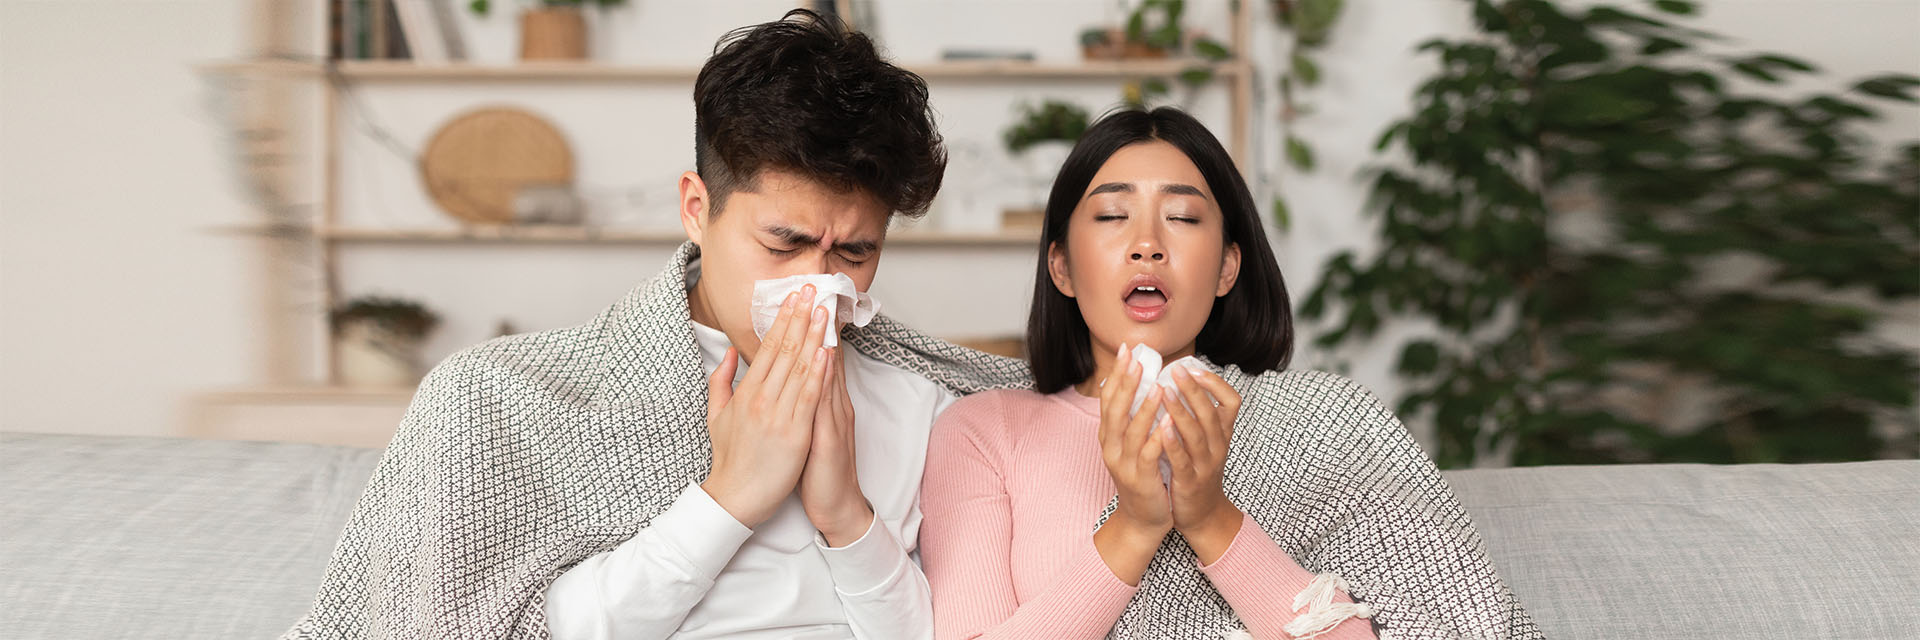 Couple sitting on couch with allergies